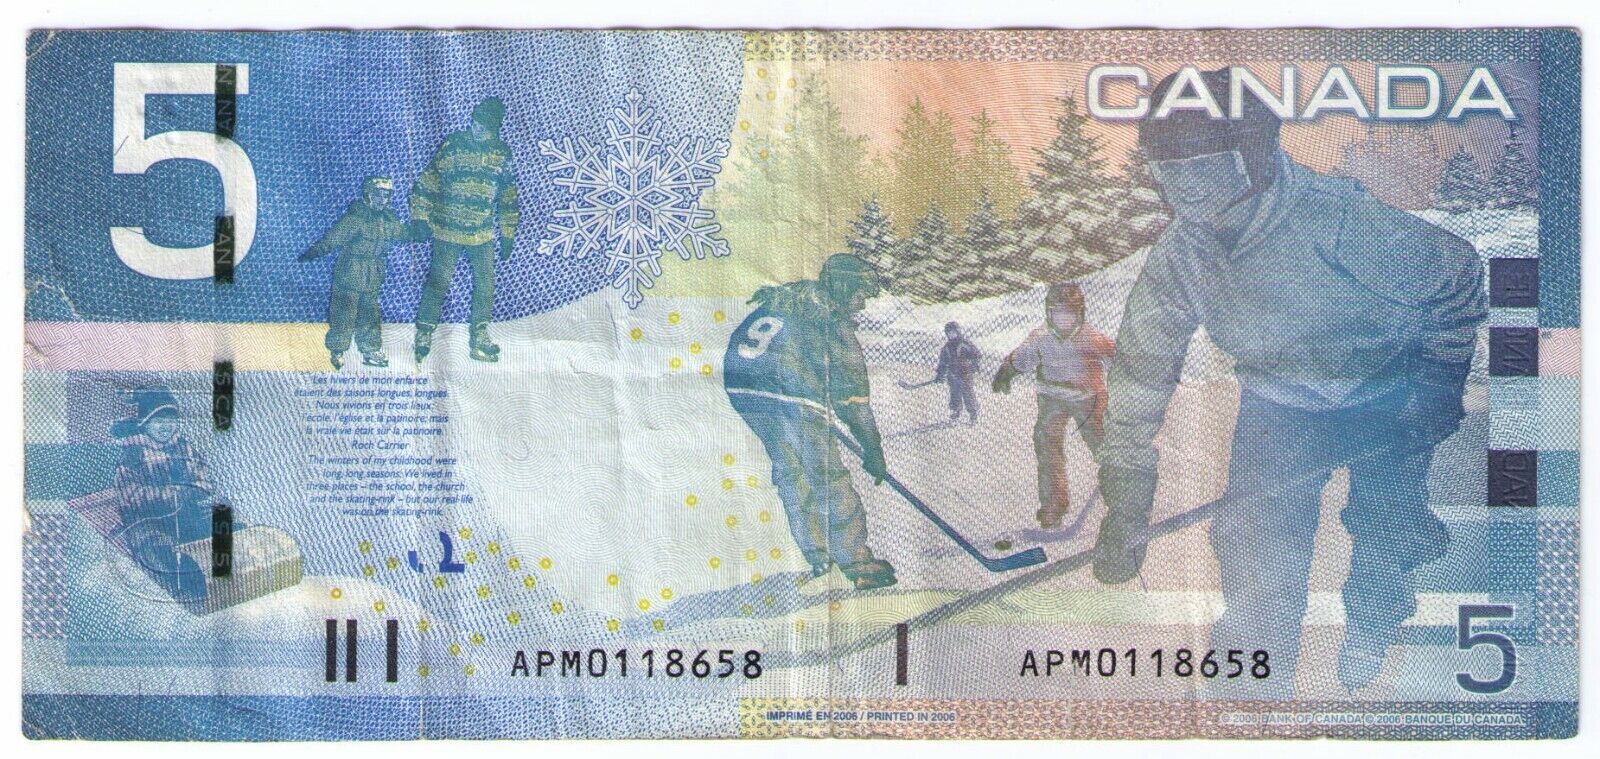 Canada 2006(06) $5 Banknote Rare Regular Issue APM0118658 circulated condition